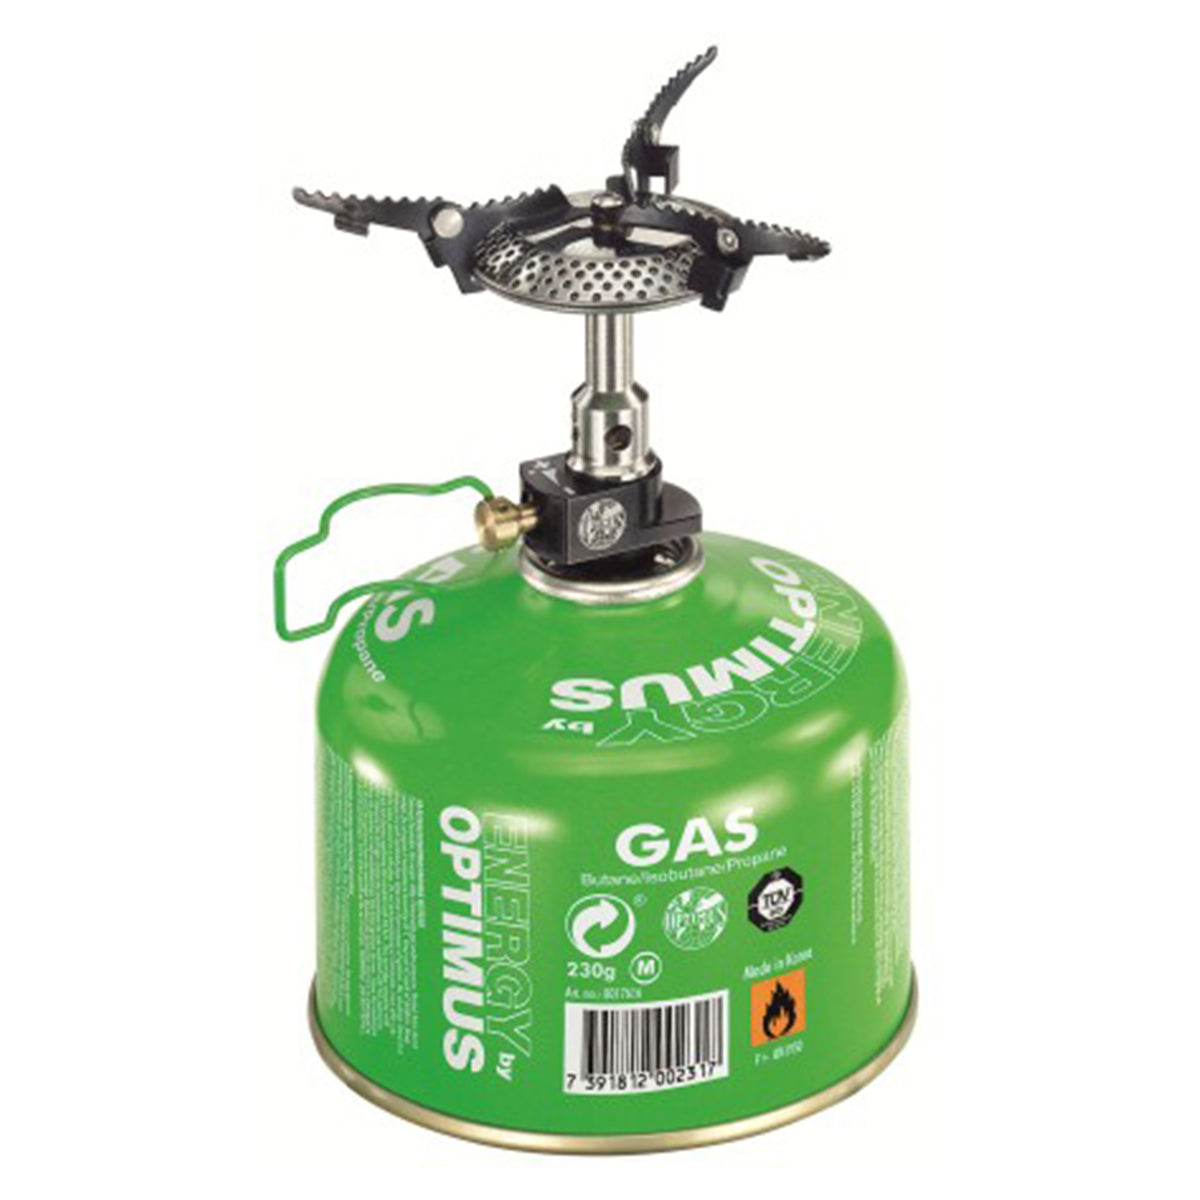 Optimus Crux Lite Solo Stove System by Optimus | Camping - goHUNT Shop